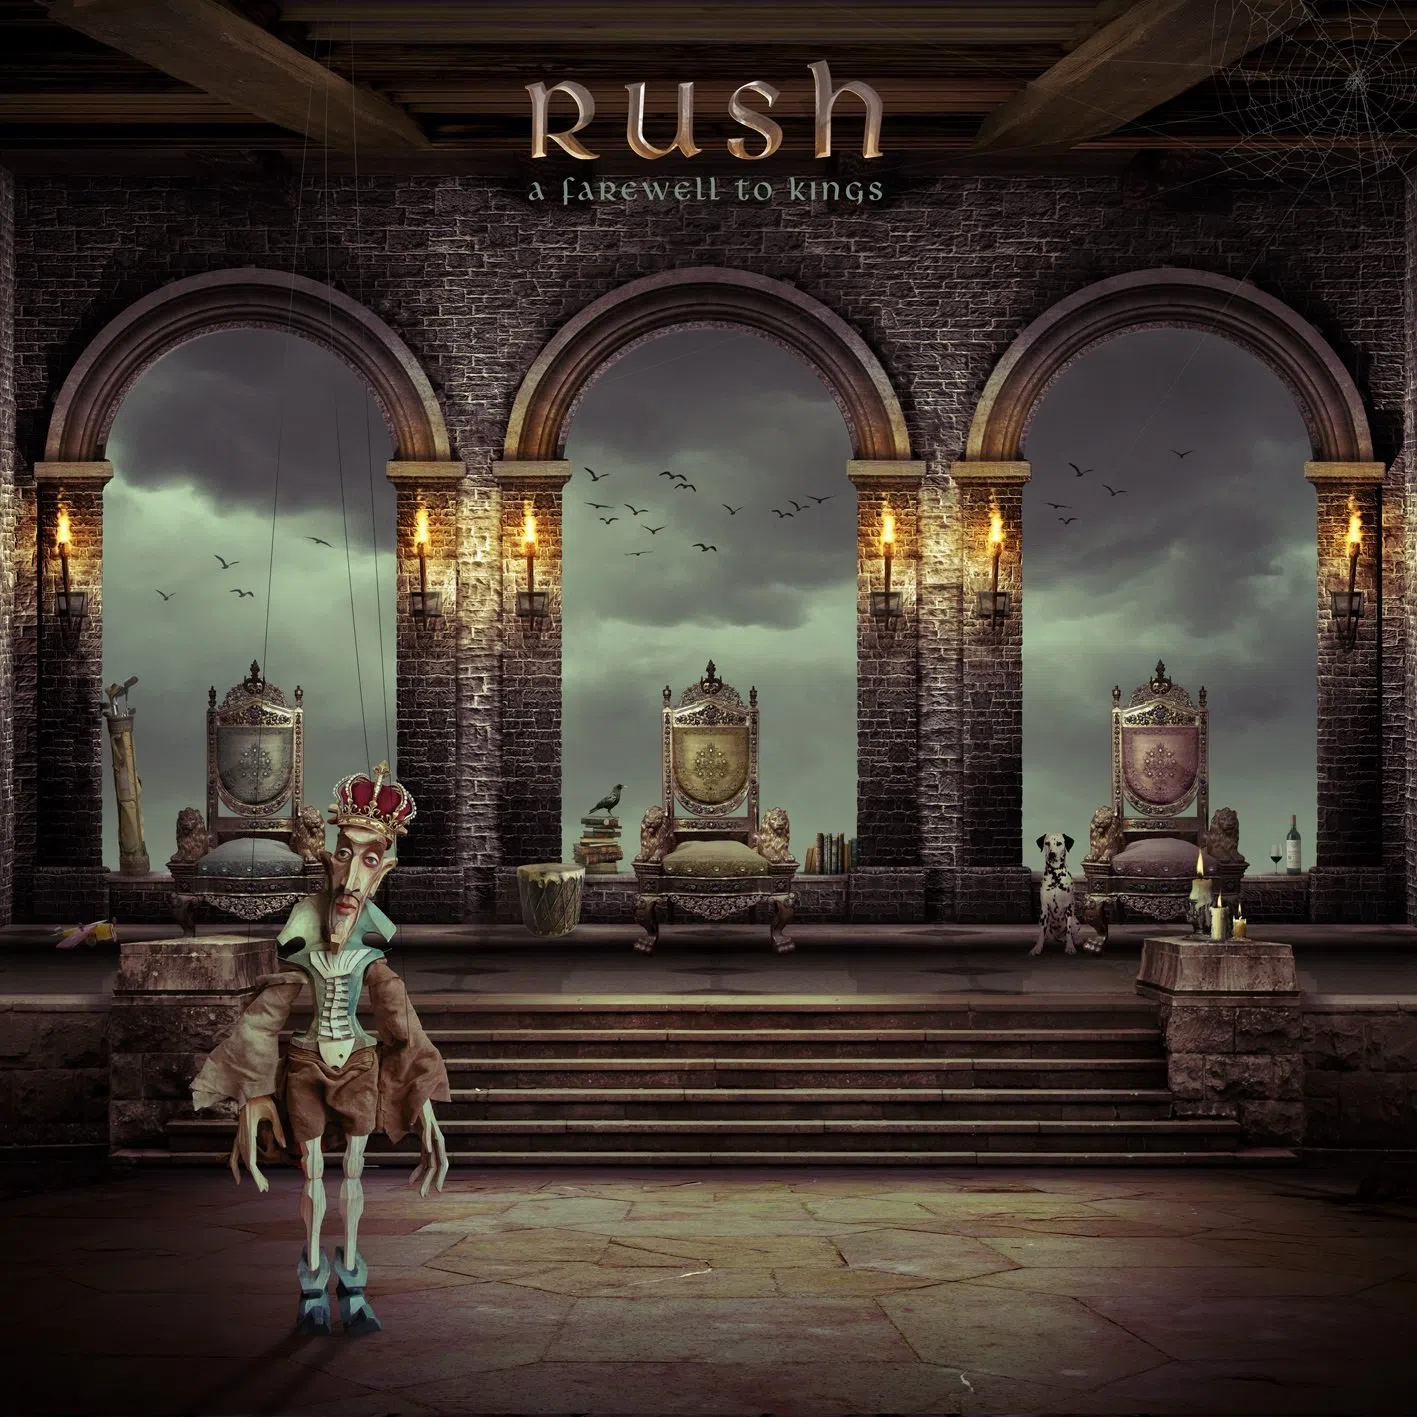 RUSH – 40th Anniversary of “A Farewell to Kings”